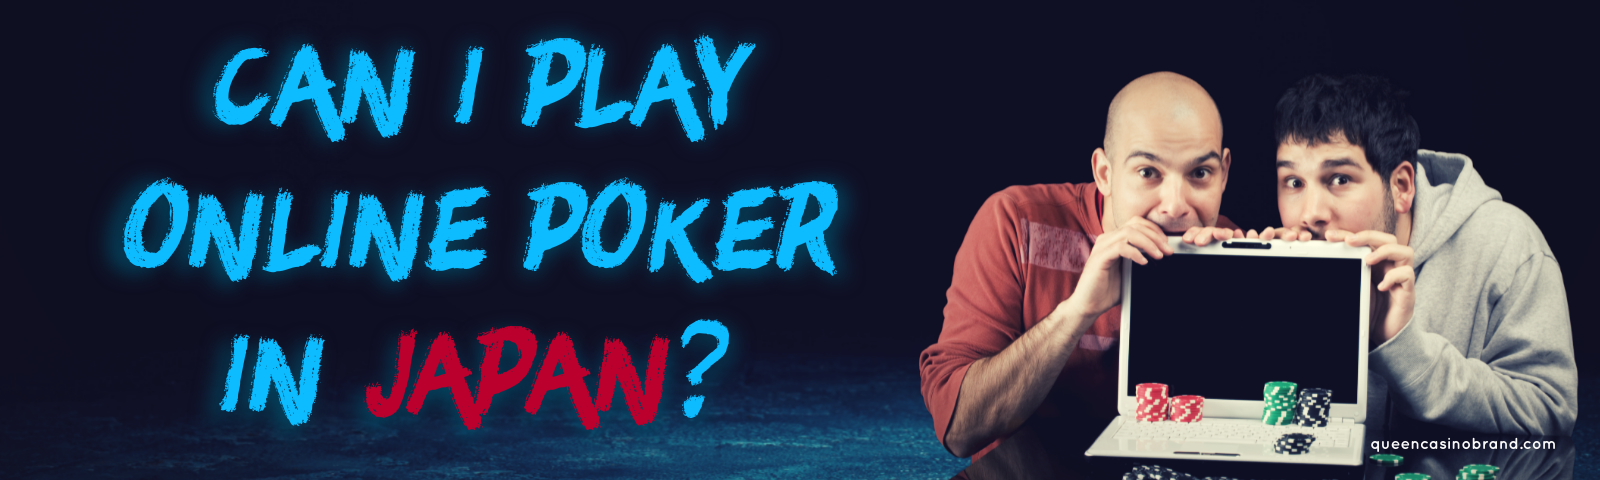 Can I Play Online Poker in Japan? | Queen Casino Brand